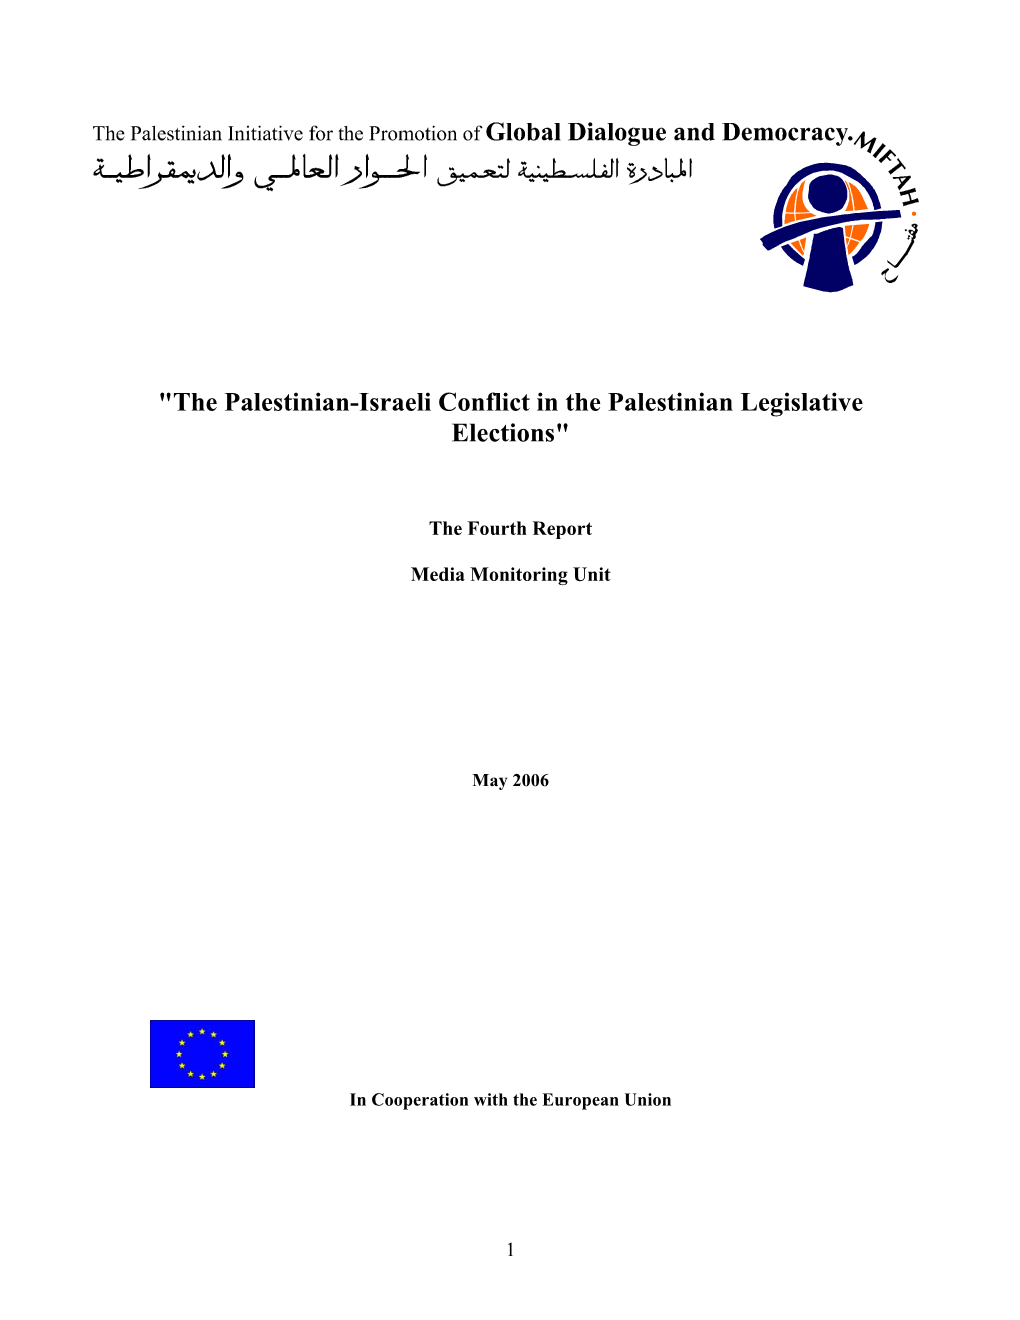 "The Palestinian-Israeli Conflict in the Palestinian Legislative Elections"